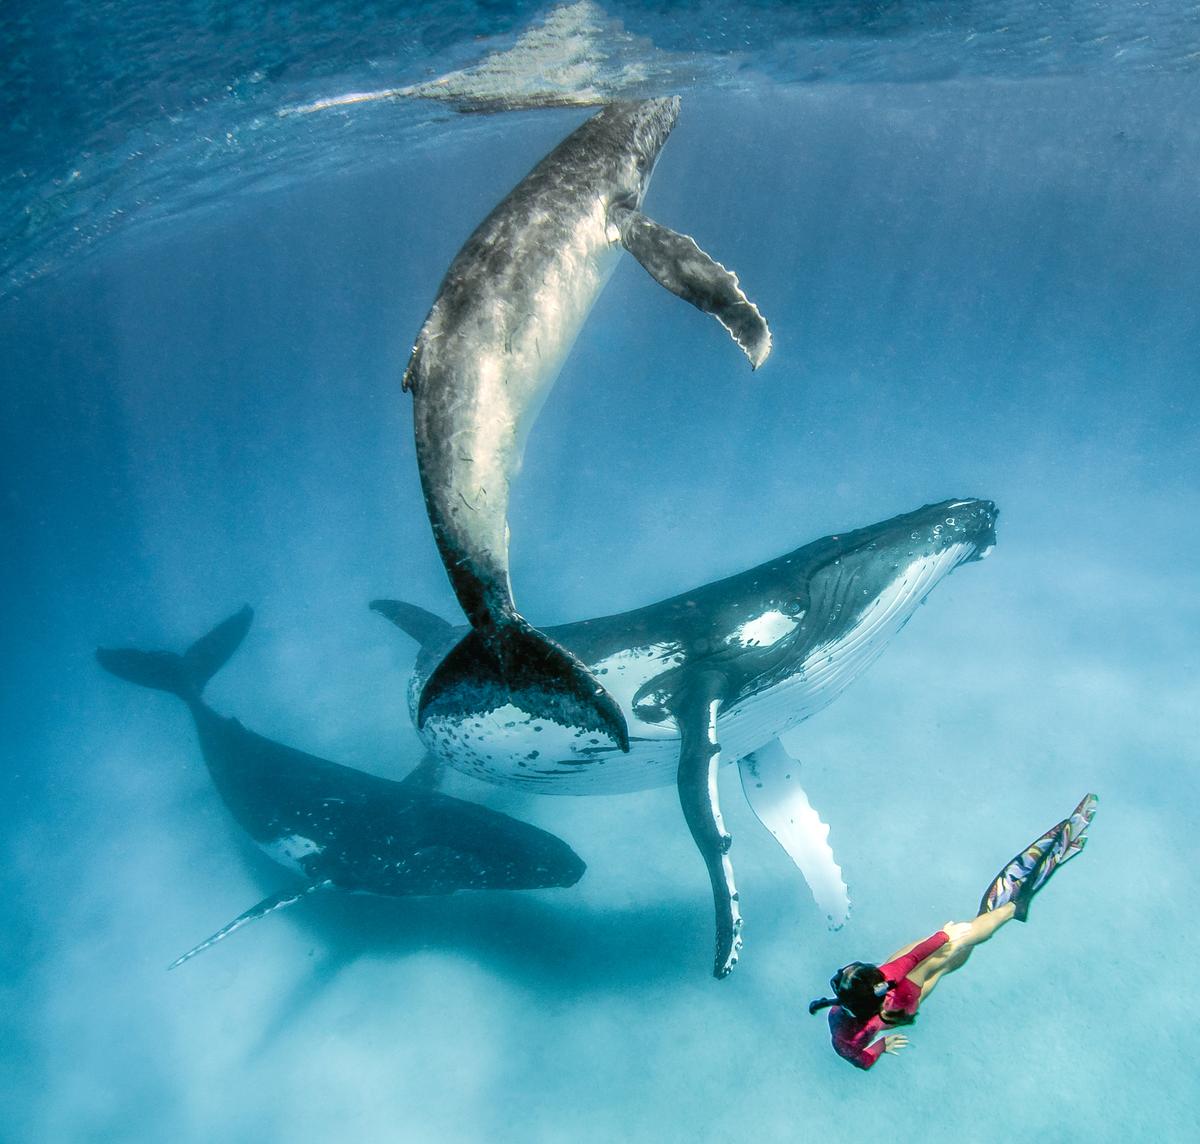 Professional underwater photographer David was able to capture some gorgeous images and video that showed the humpback seemingly "dancing" with his wife off the islands of Tonga in the South Pacific. (SWNS)